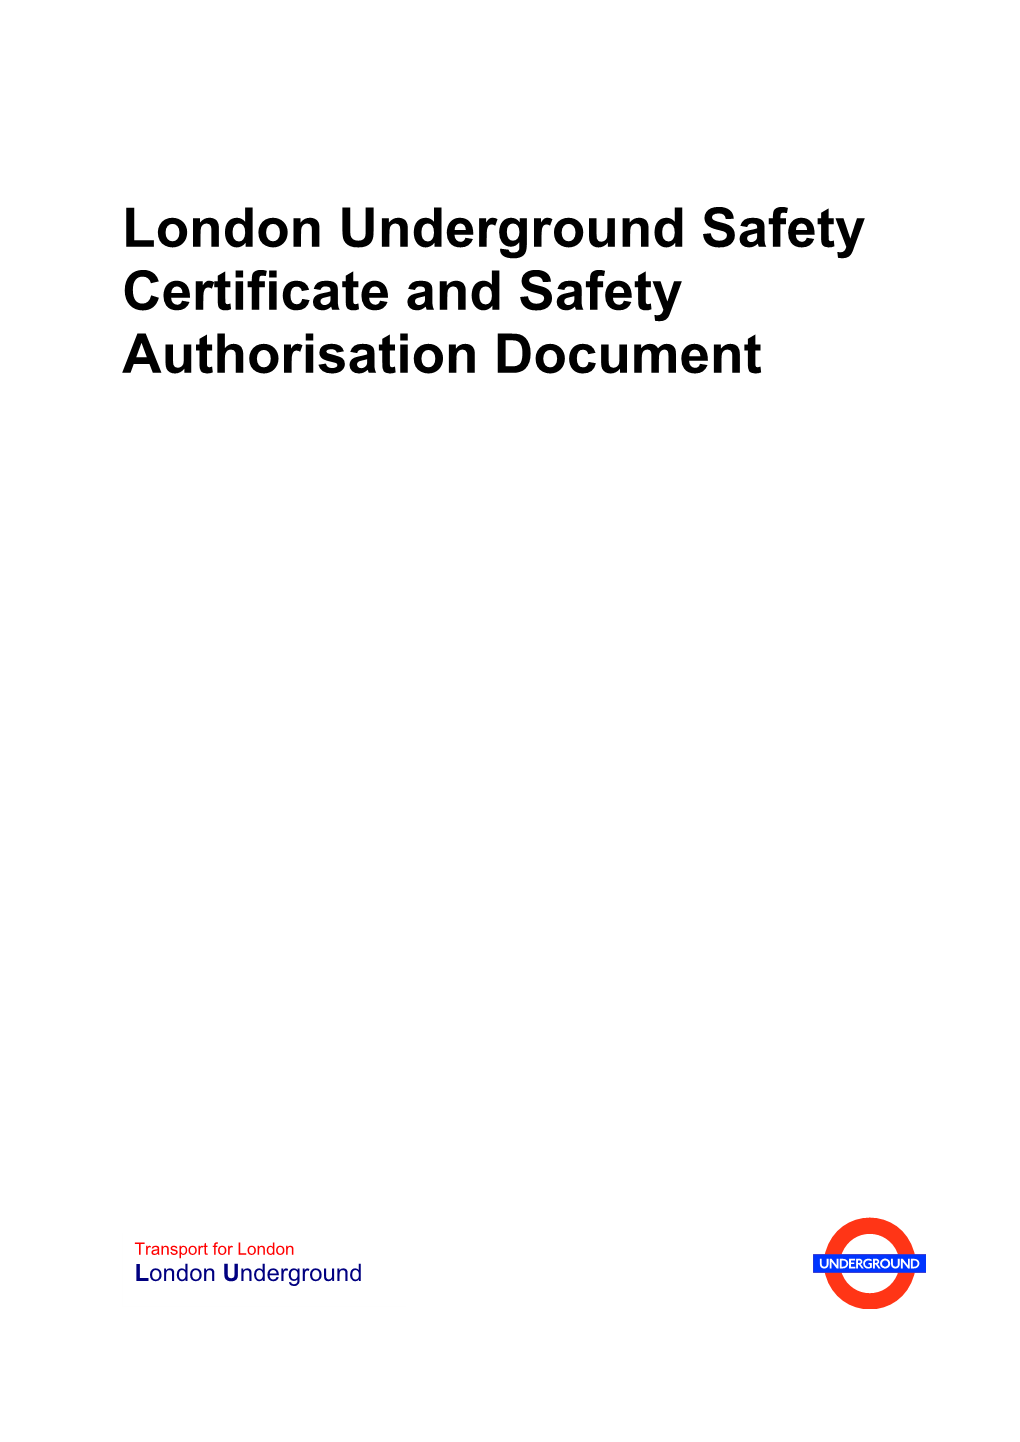 Safety Certificate and Safety Authorisation Document